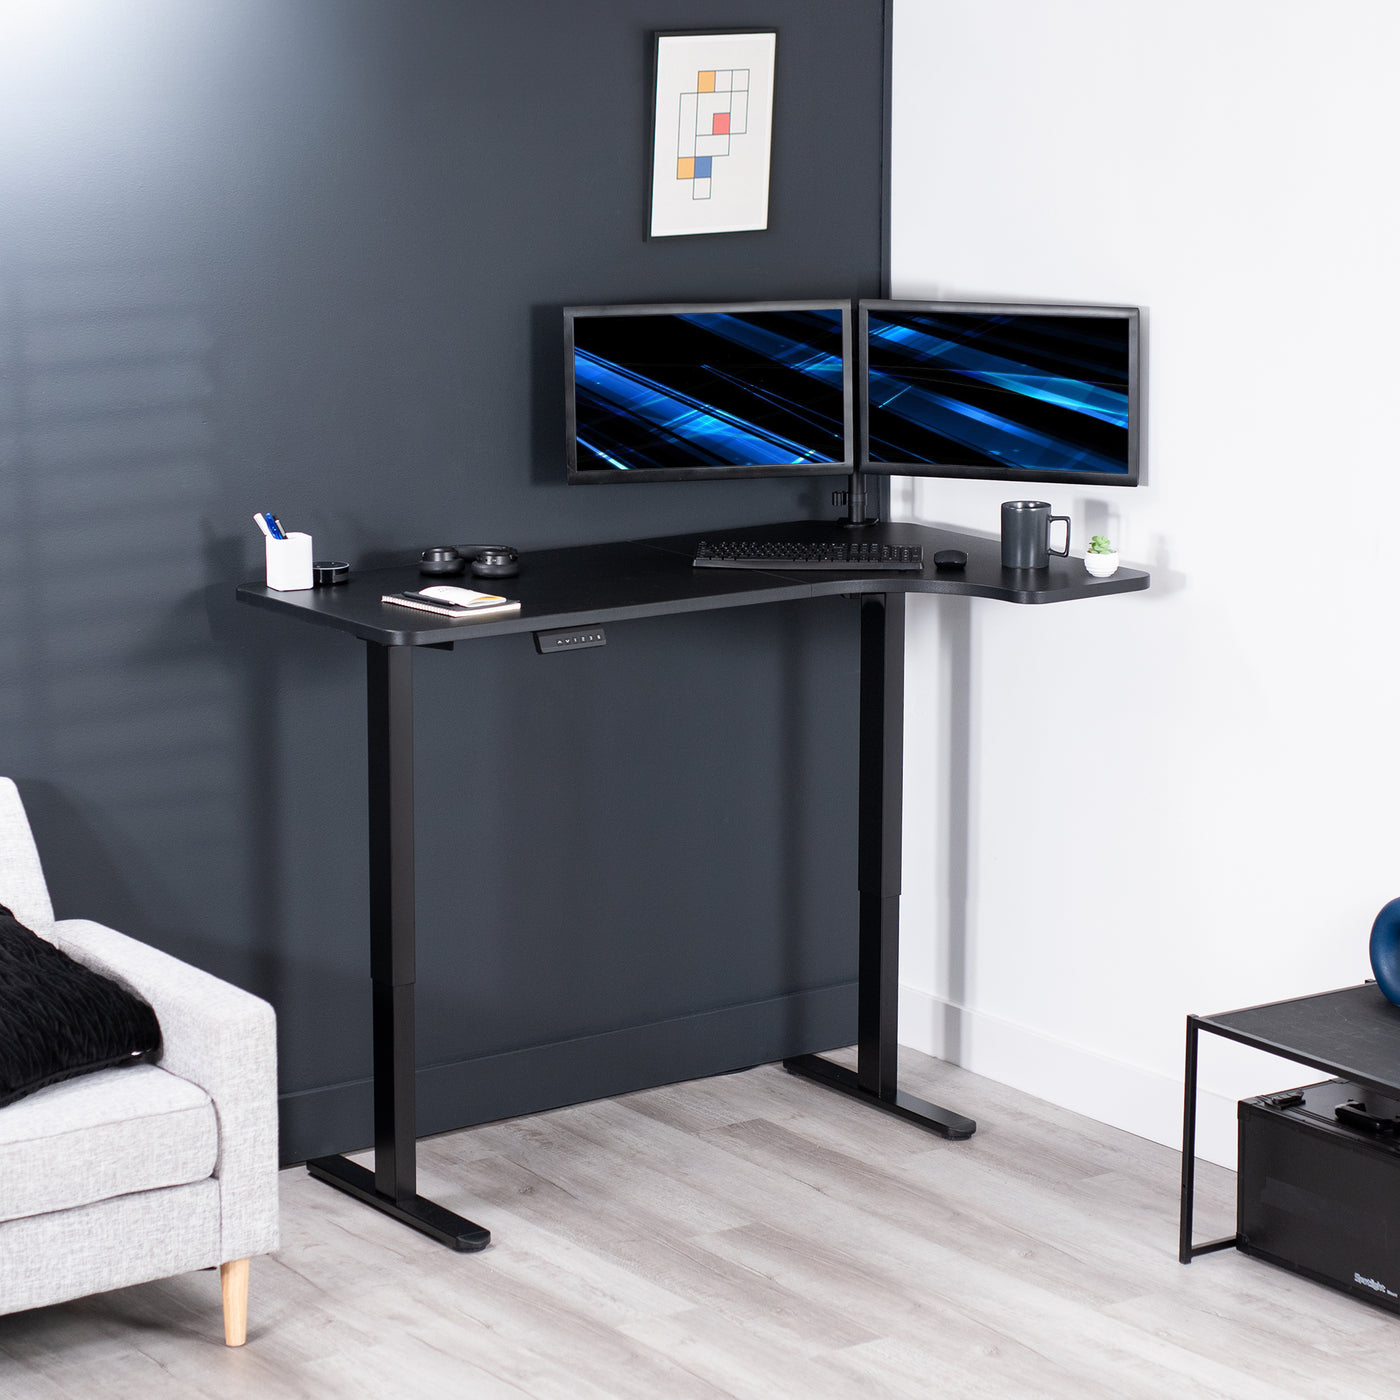 Dual monitor mount attached to a height adjustable desk with a slight corner curve offering more workspace to the side of choice.